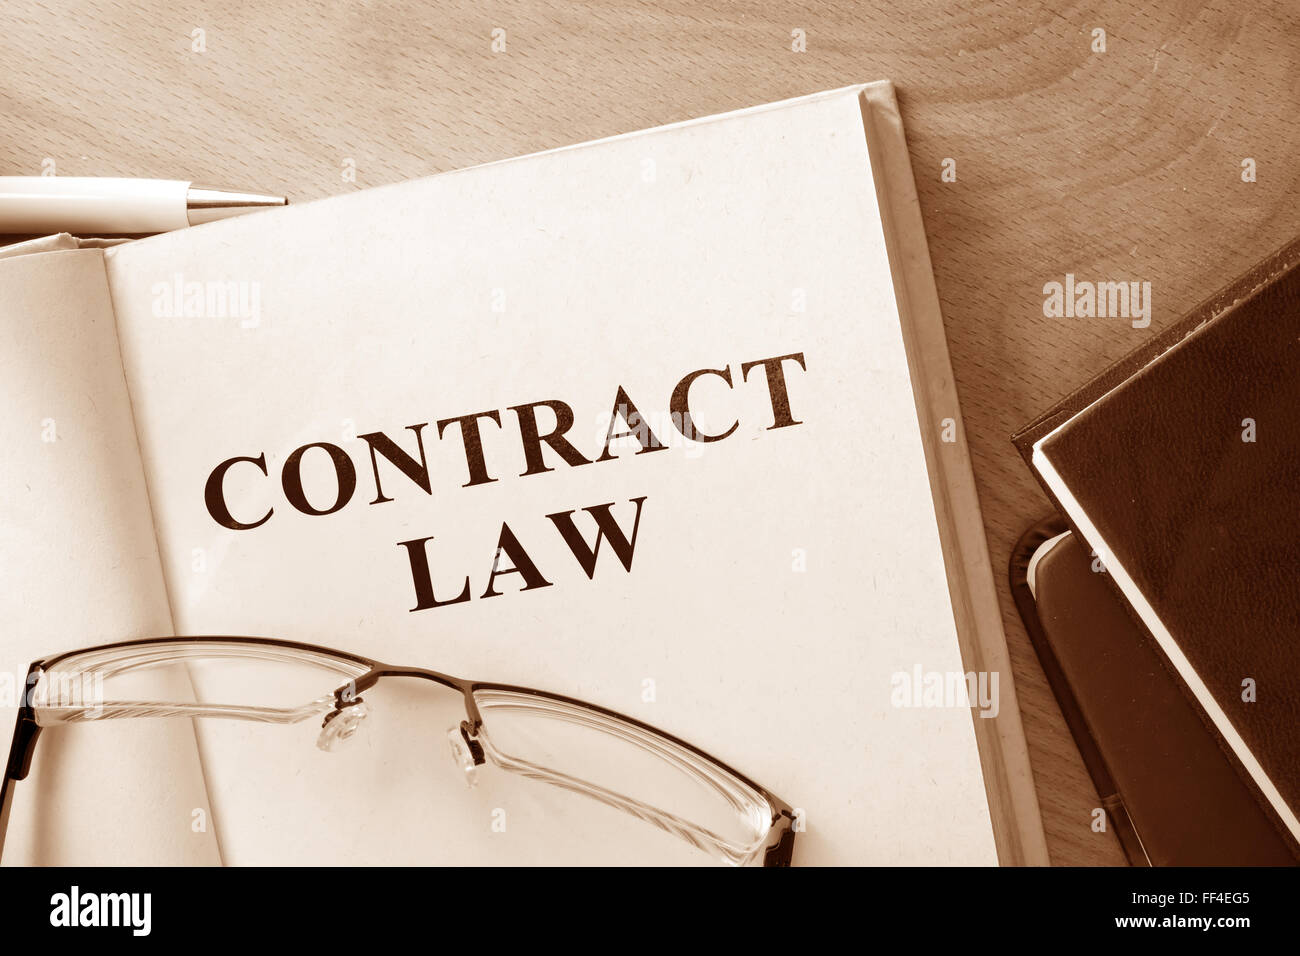 Code of contract law on a wooden table. Stock Photo